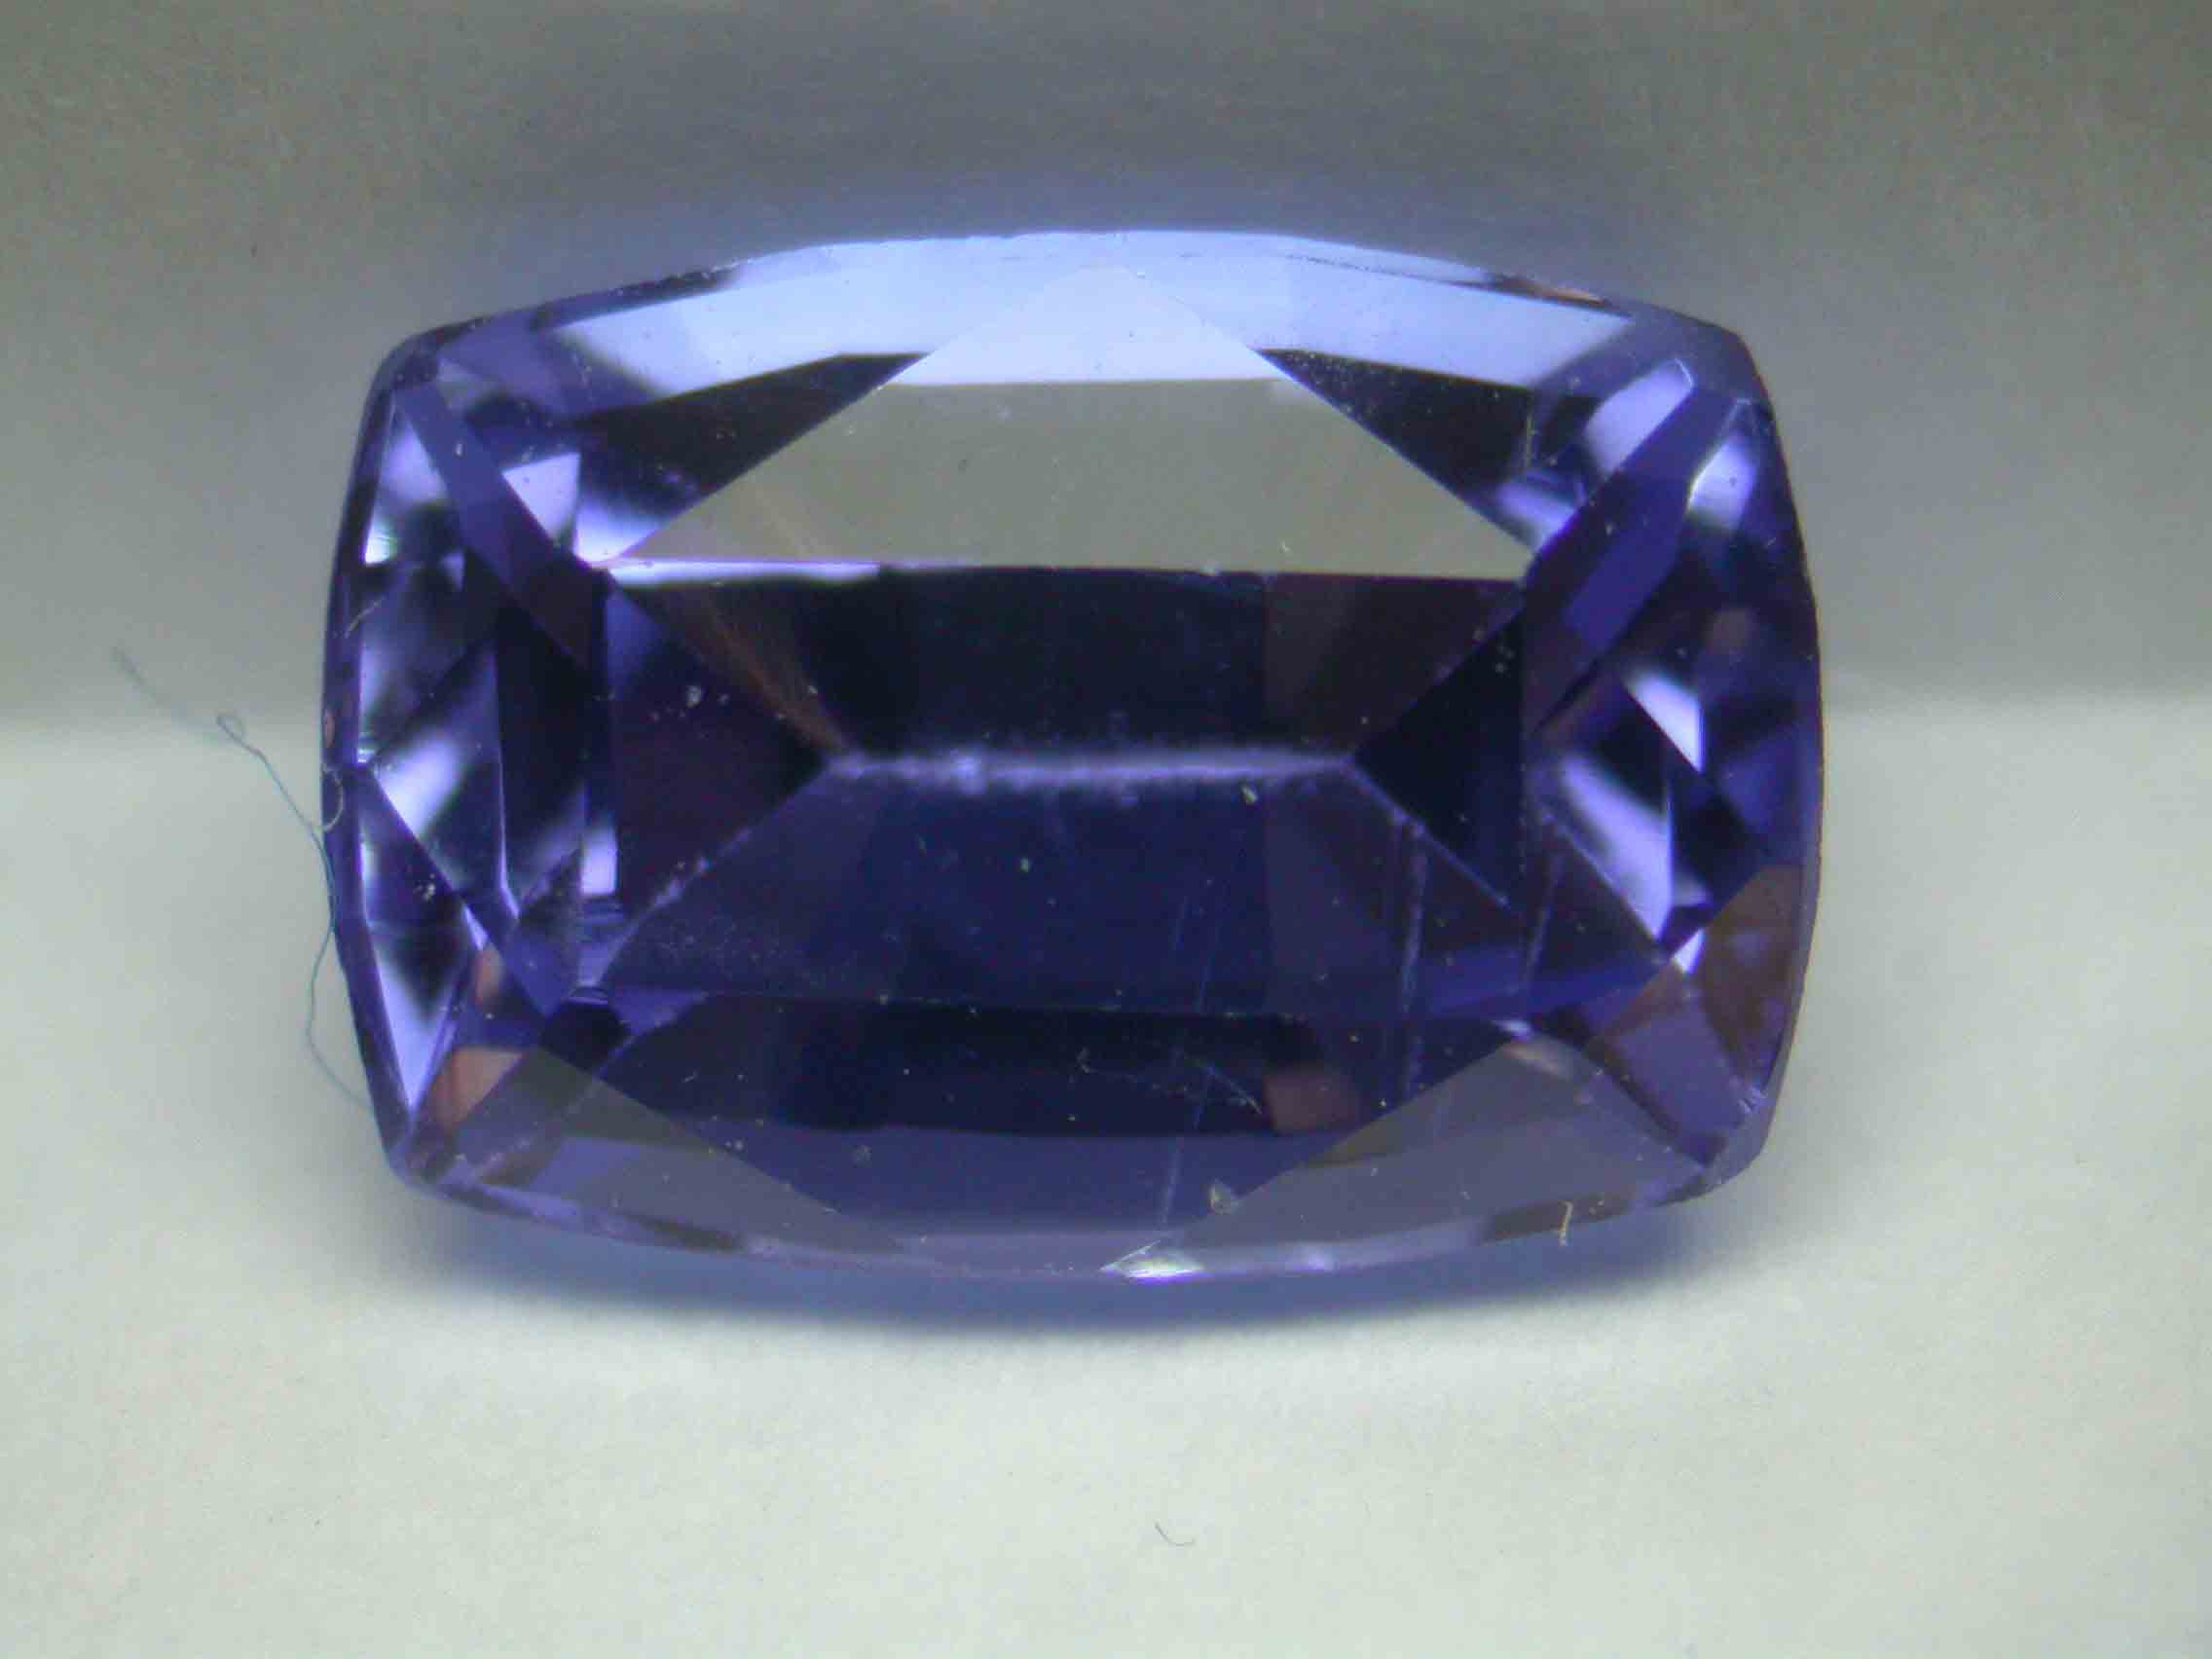 Common Mistakes: The Pitfalls Many New Gemmologists Encounter - - Tanzanite 6566 PD